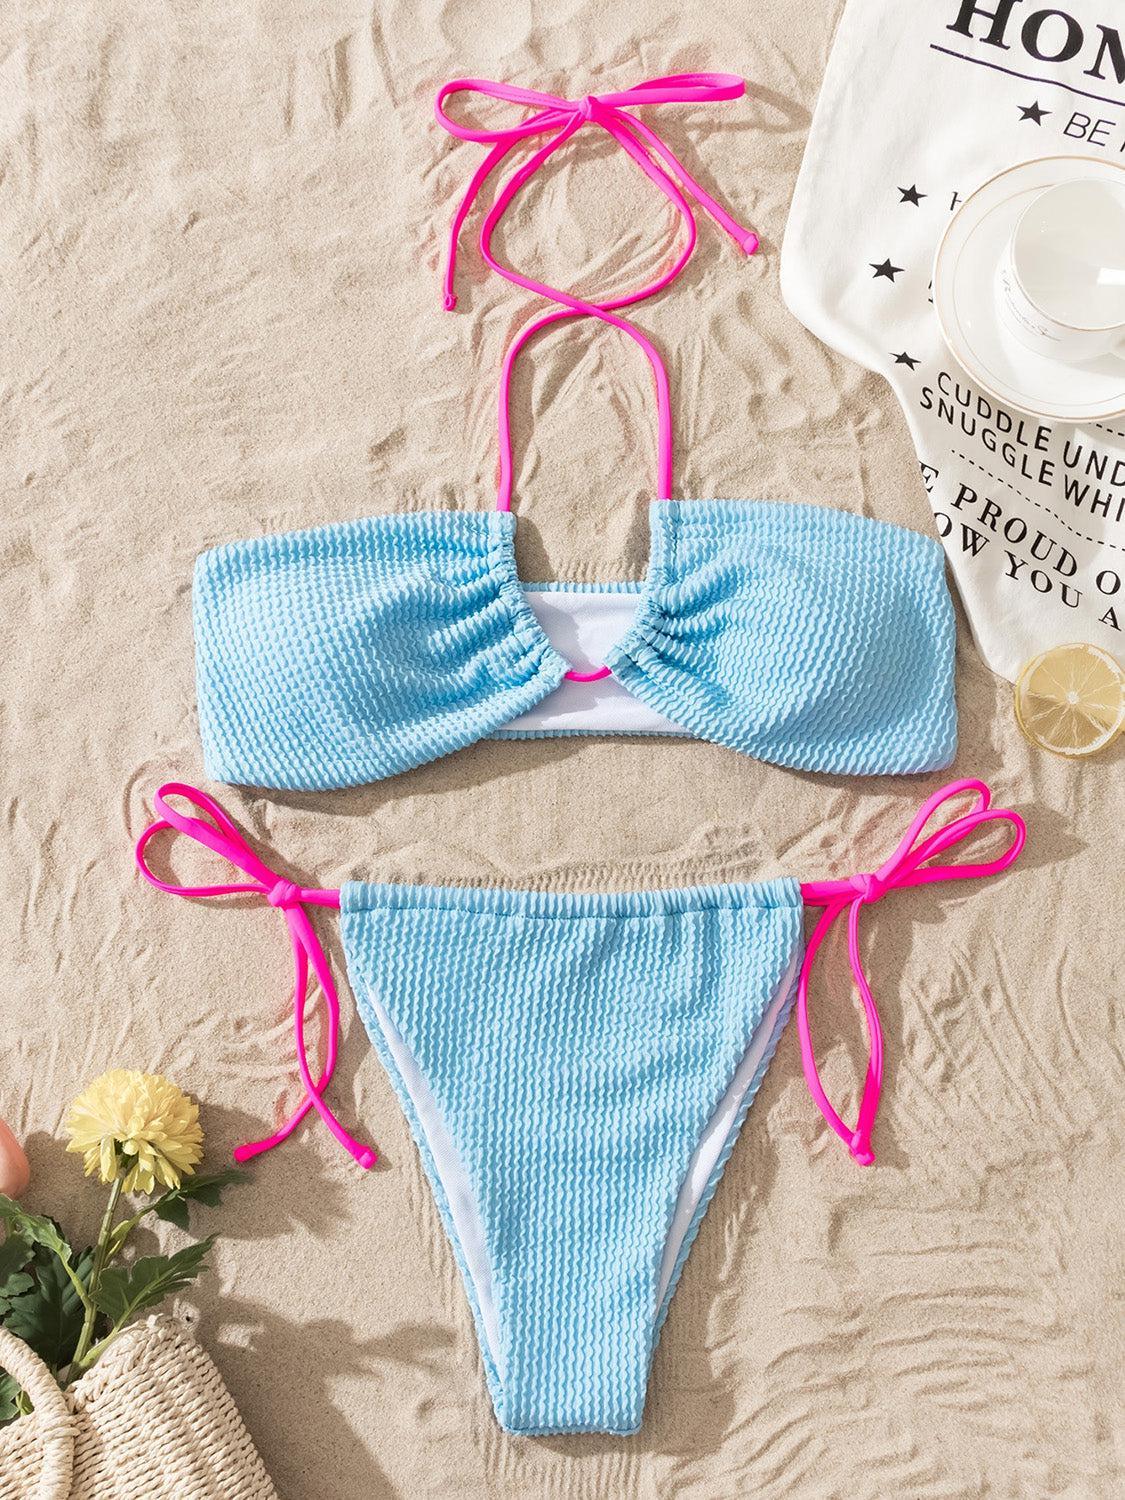 a bikini top with a pink bow on it